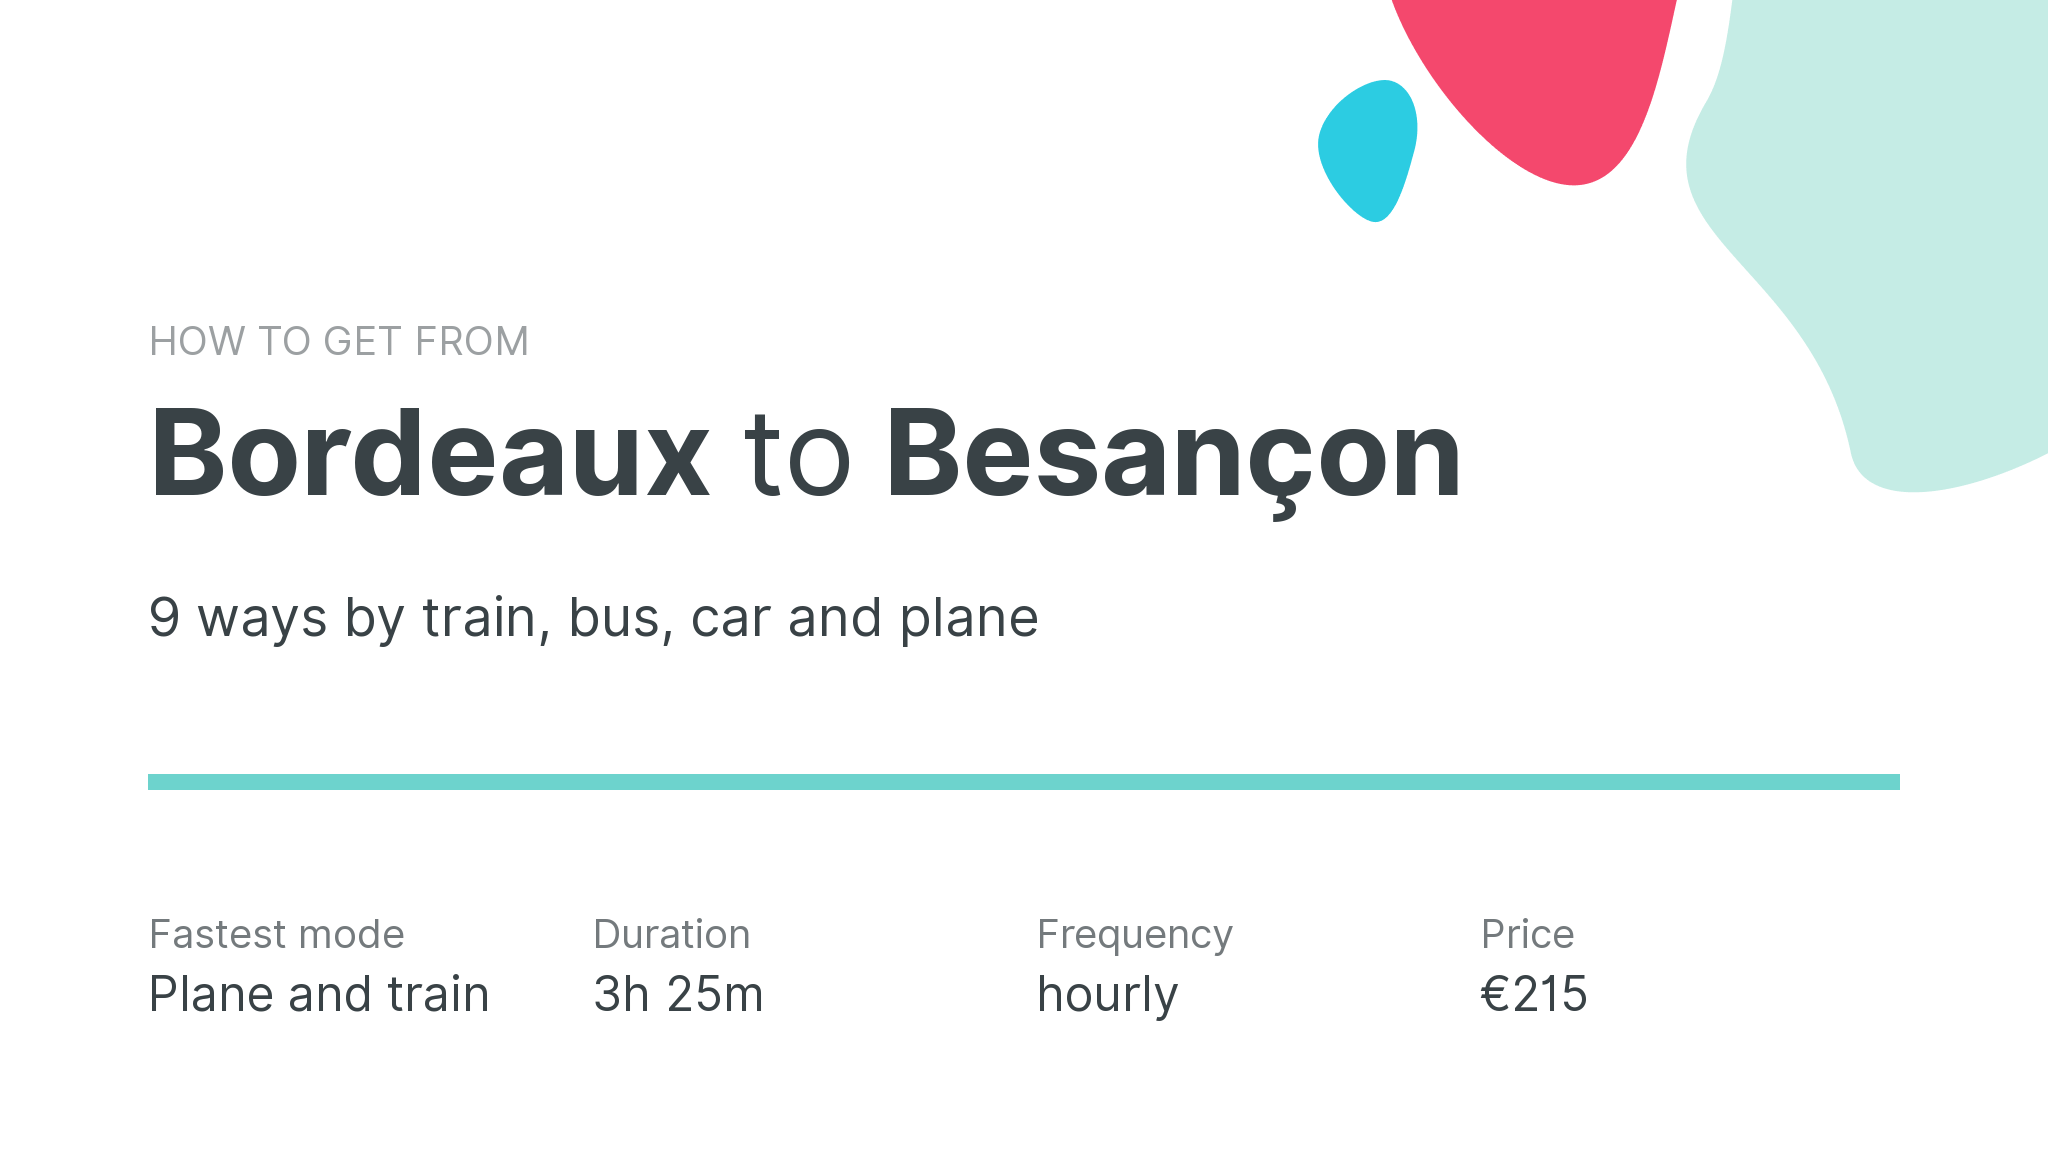 How do I get from Bordeaux to Besançon